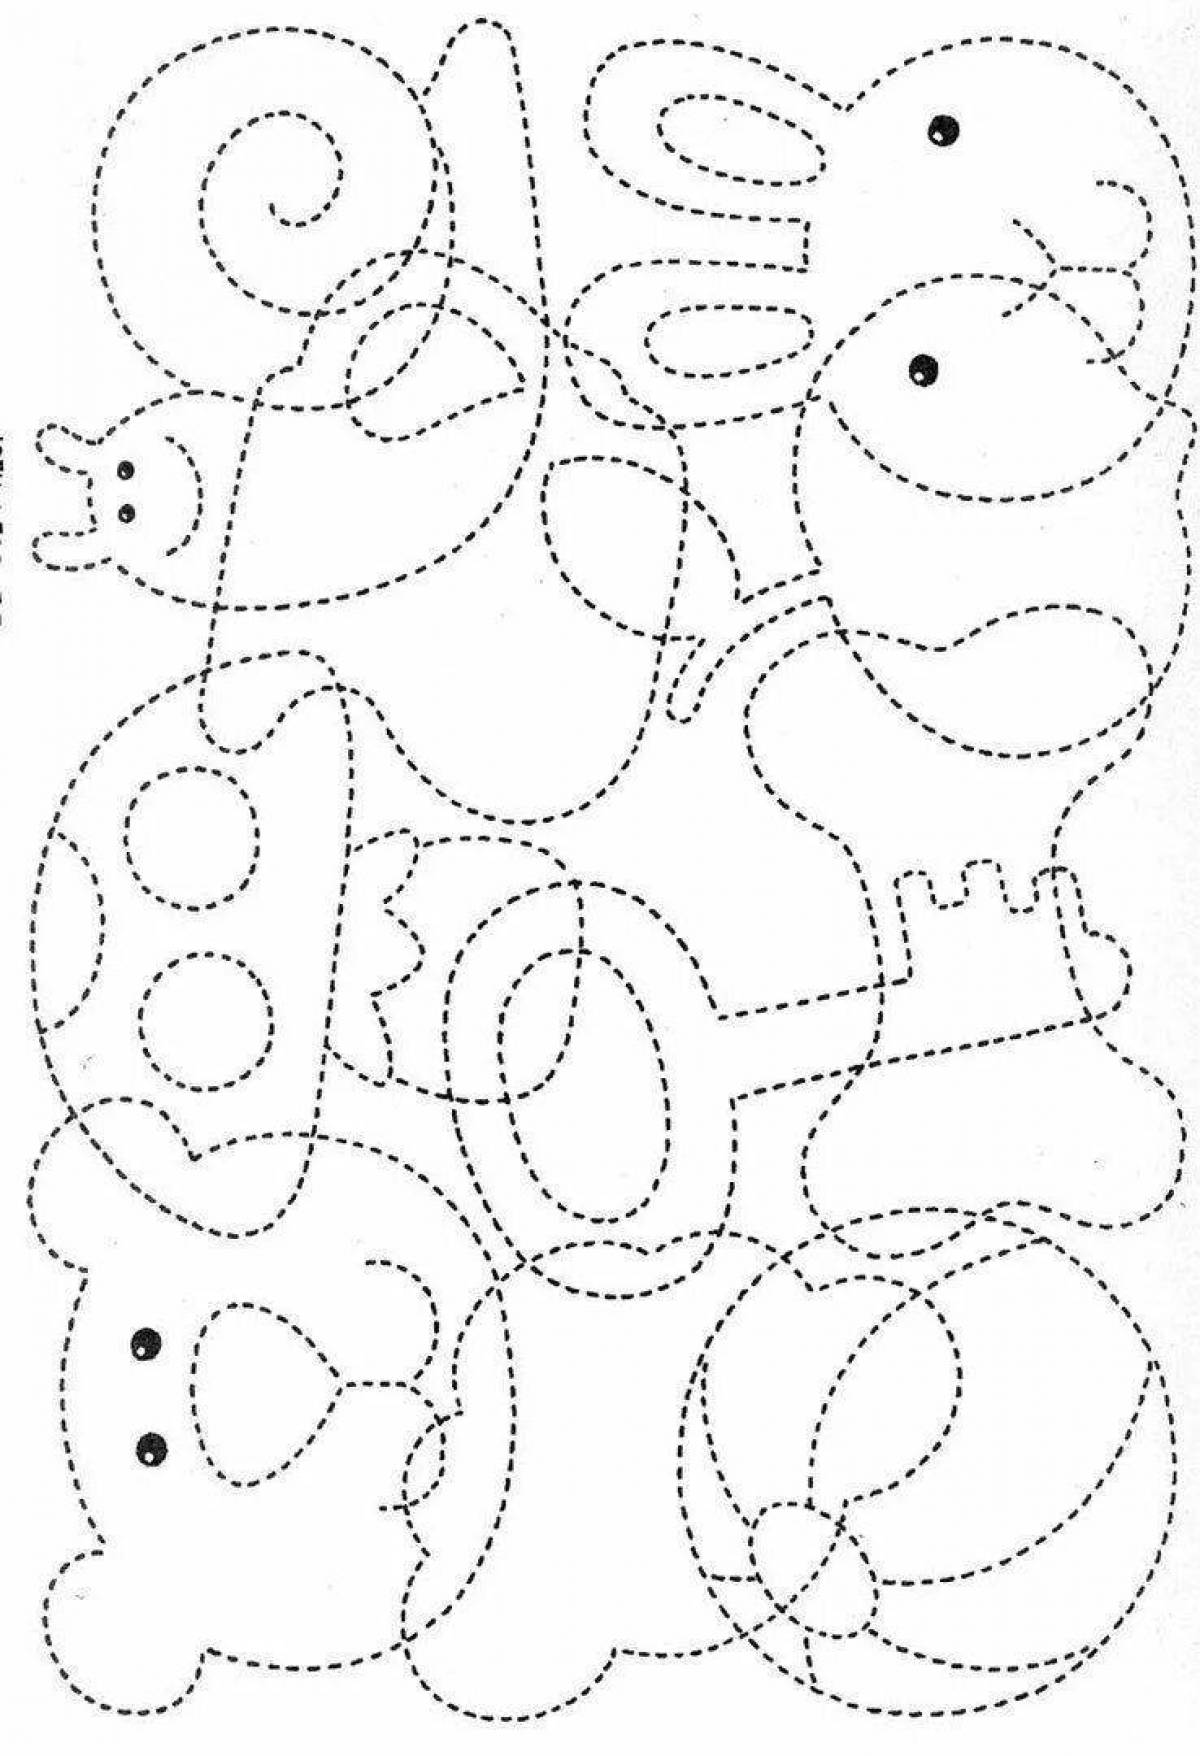 A fun coloring book for the development of fine motor skills in children aged 6-7